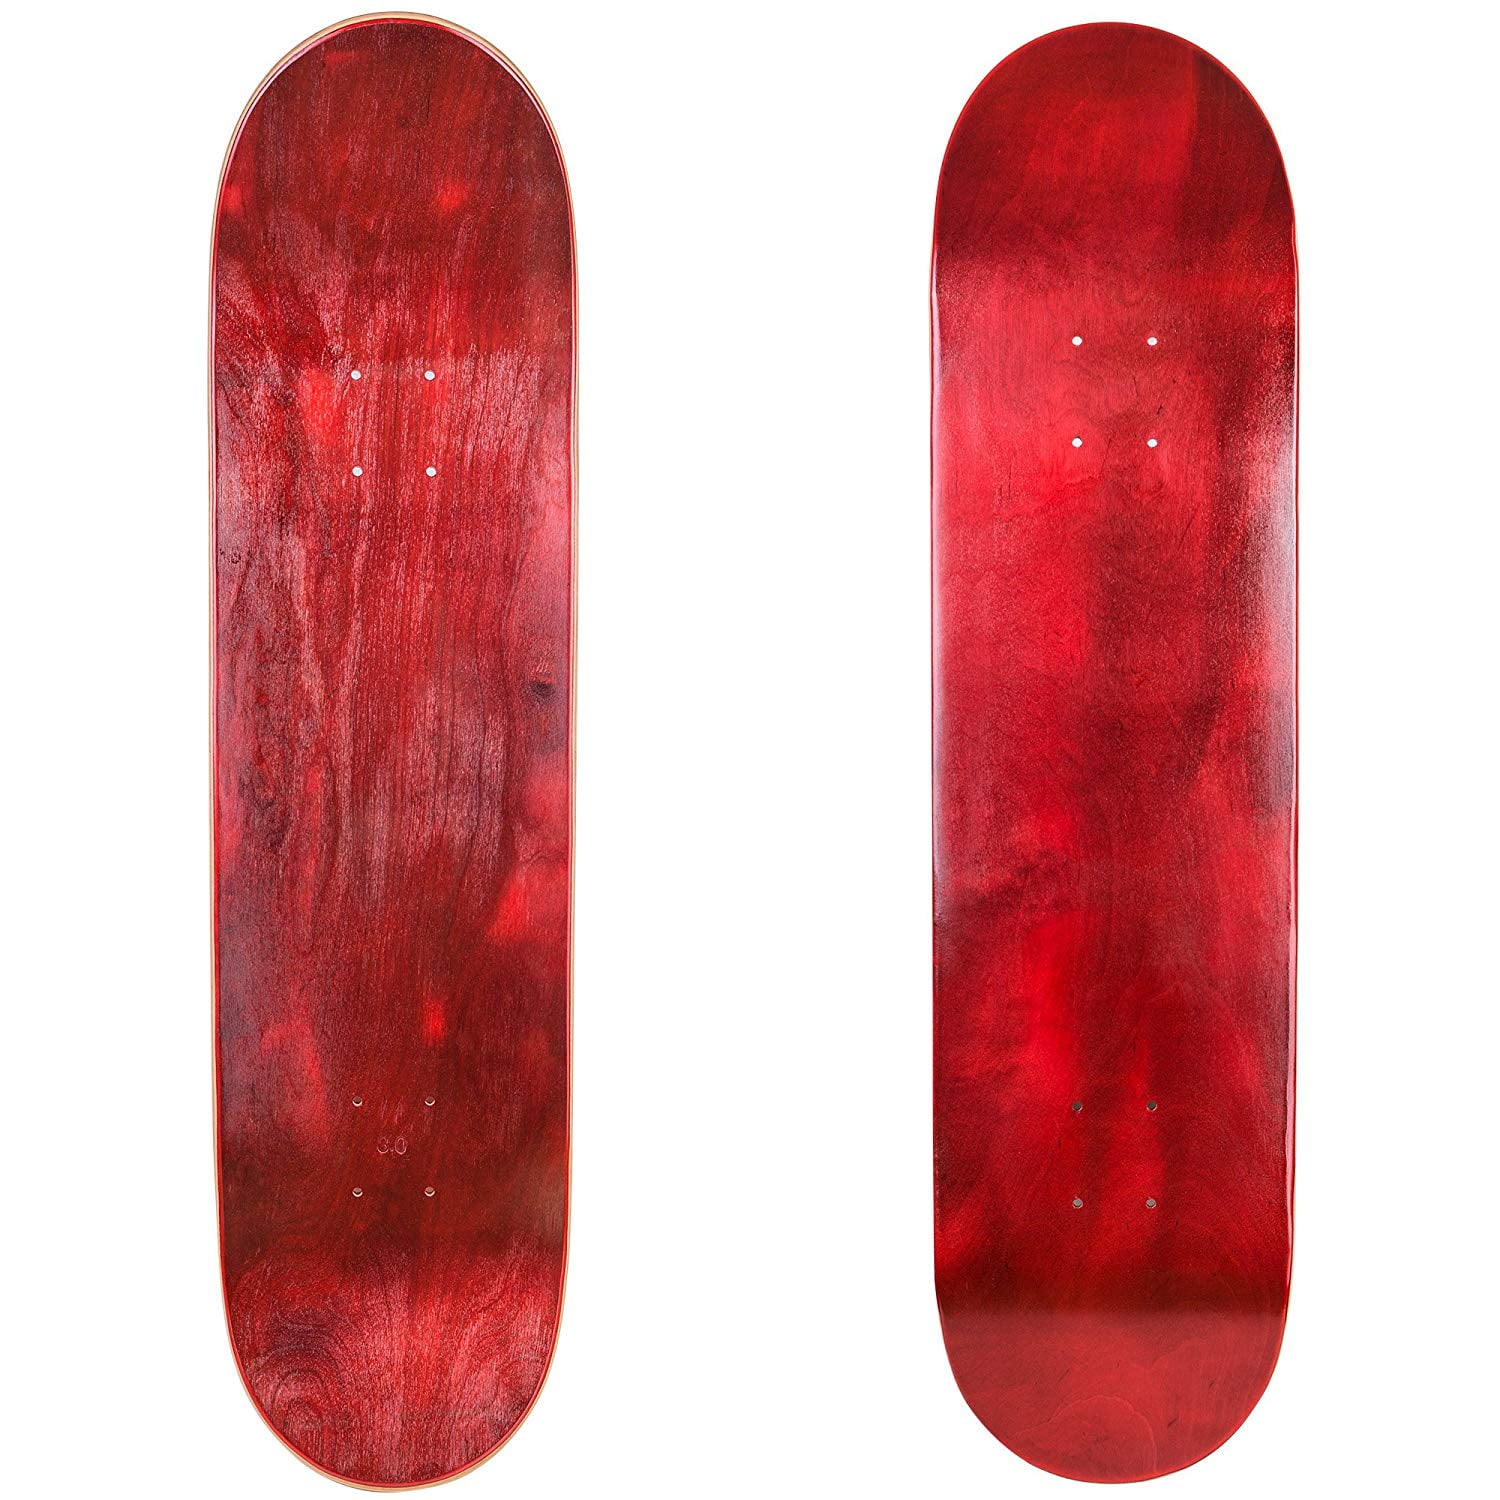 Maple Board for Skating 8.0 8.25 and 8.5 Inch 7.75 Cal 7 Blank Skateboard Deck with Color Grip Tape